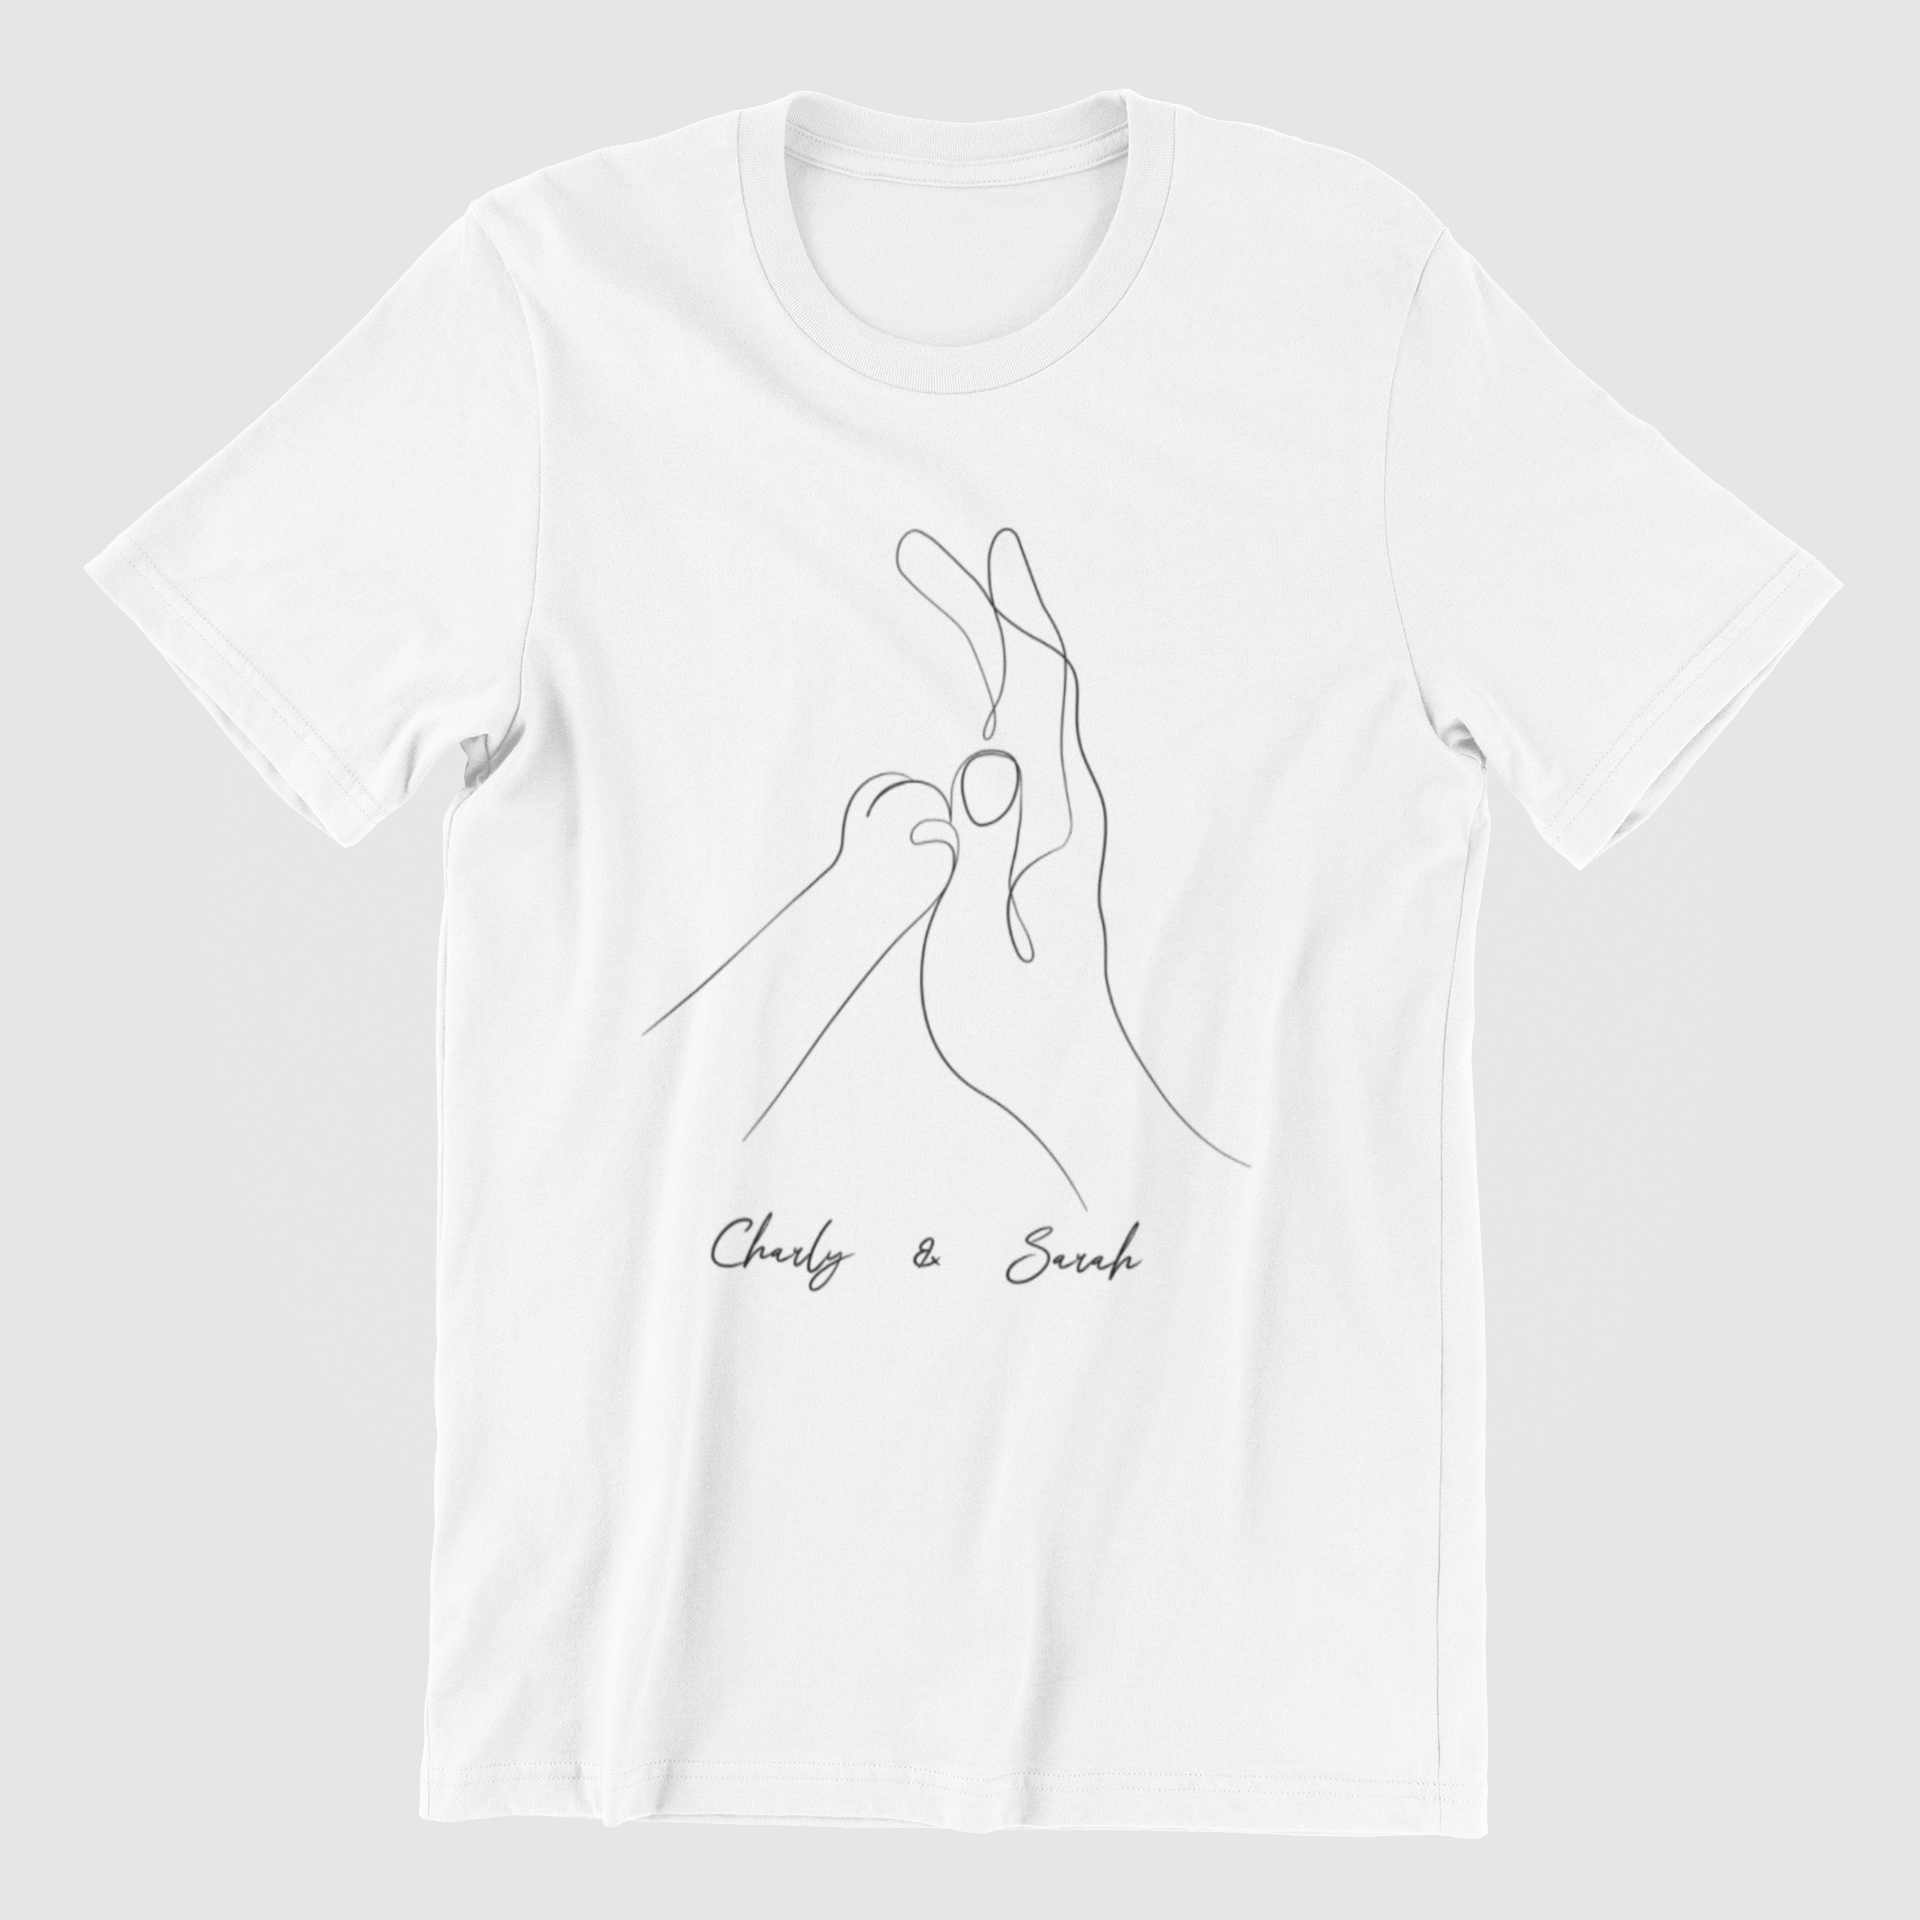 White T-shirt with Human & Cat Paw T-Shirt featuring a custom design of a cat paw and human hand holding each other, symbolizing the bond between pet and owner.